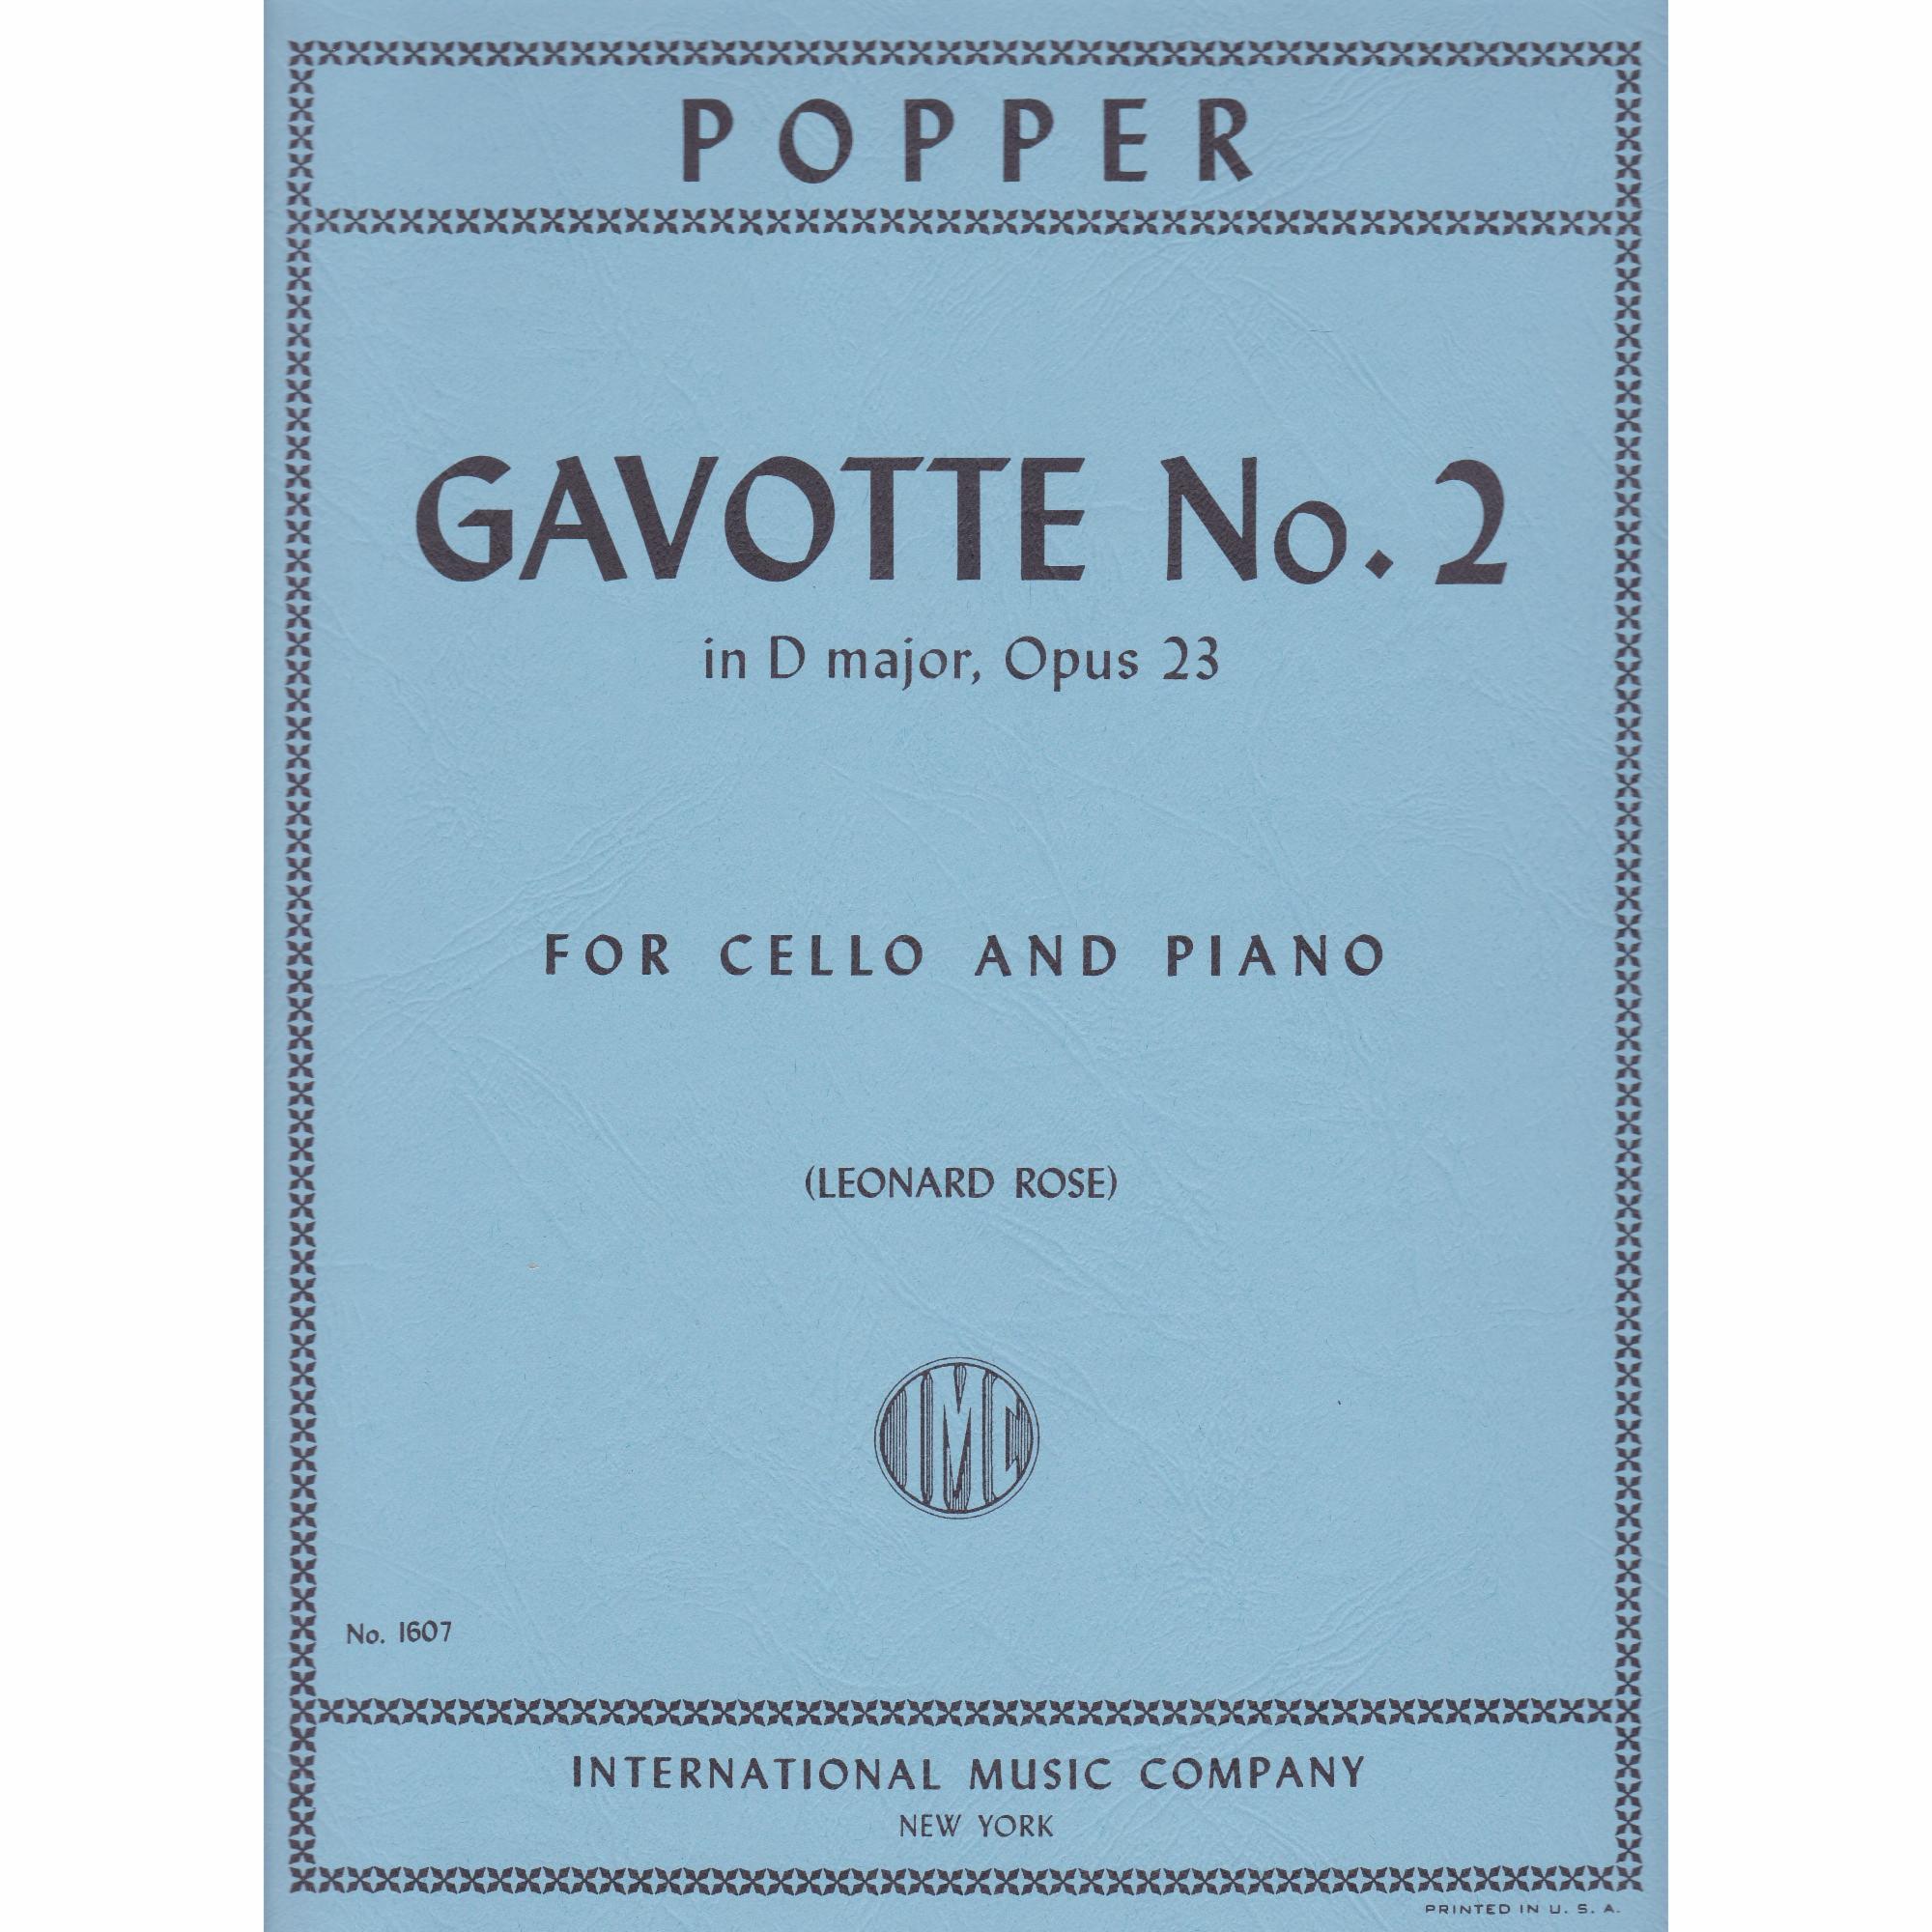 Gavotte No. 2 in D Major for Cello and Piano, Op. 23